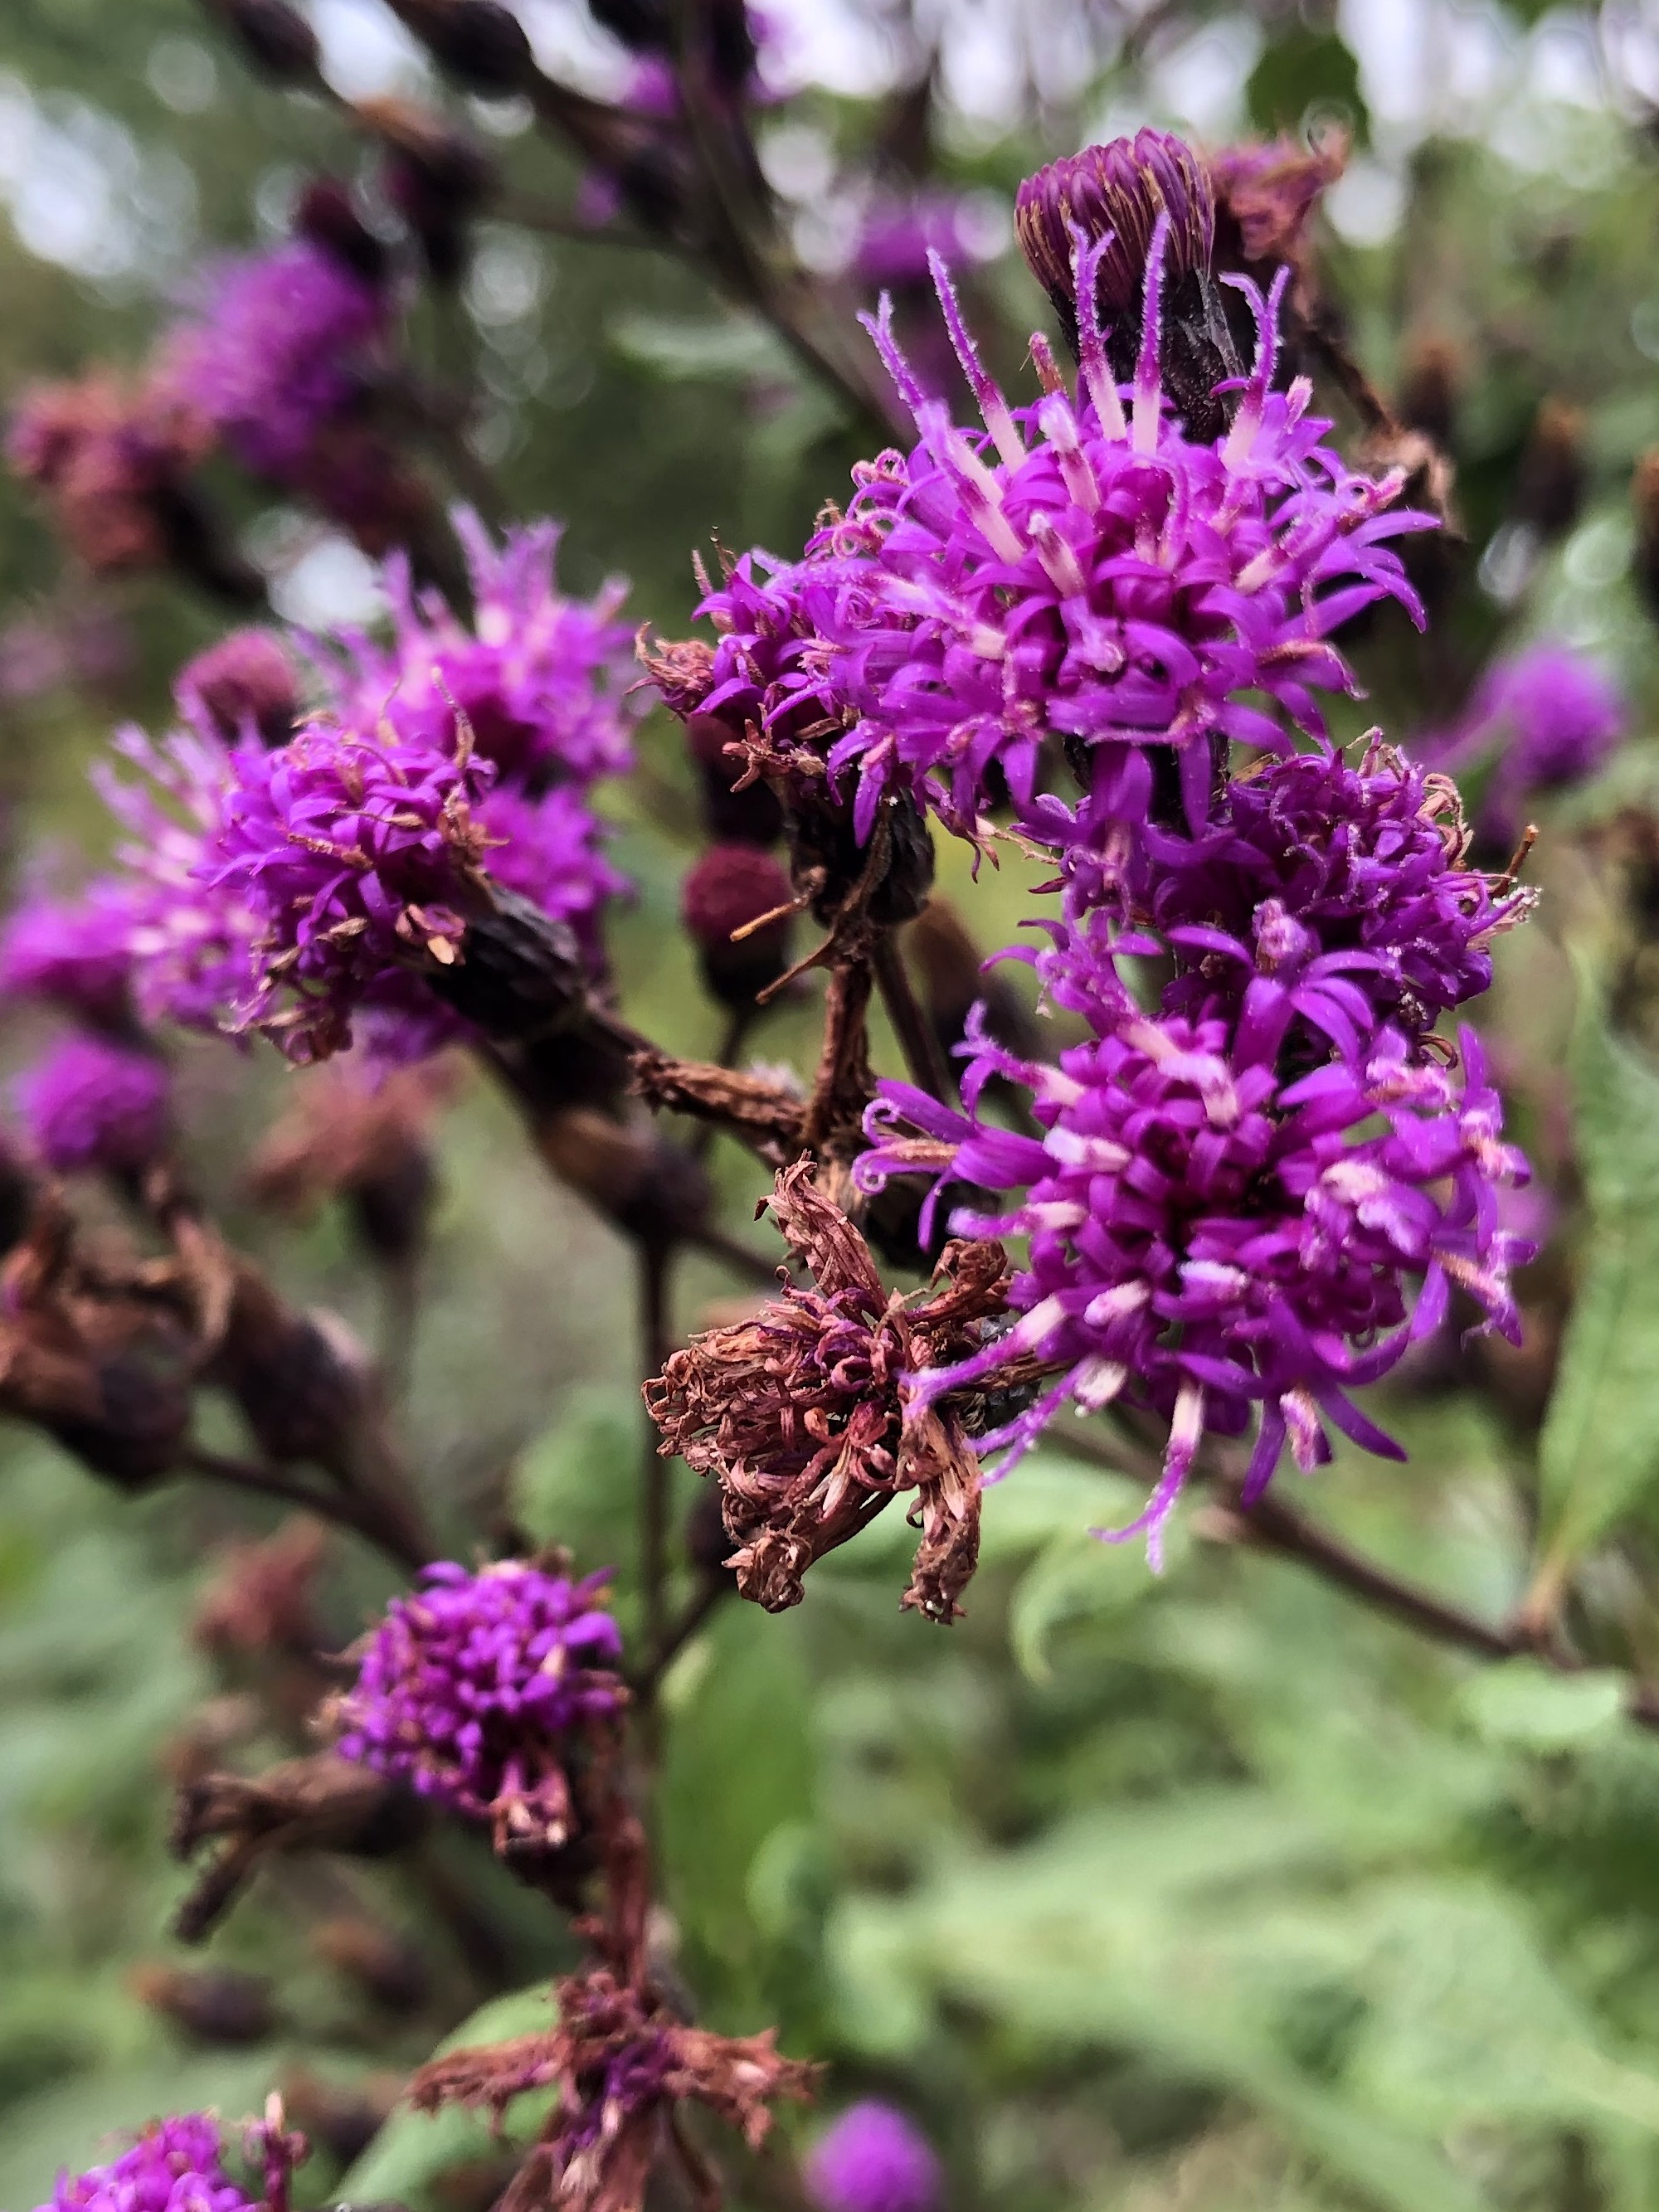 Tall Ironweed in drainage ditch along bikepath between Midvale Blvd. and the Beltline on September 14, 2020.